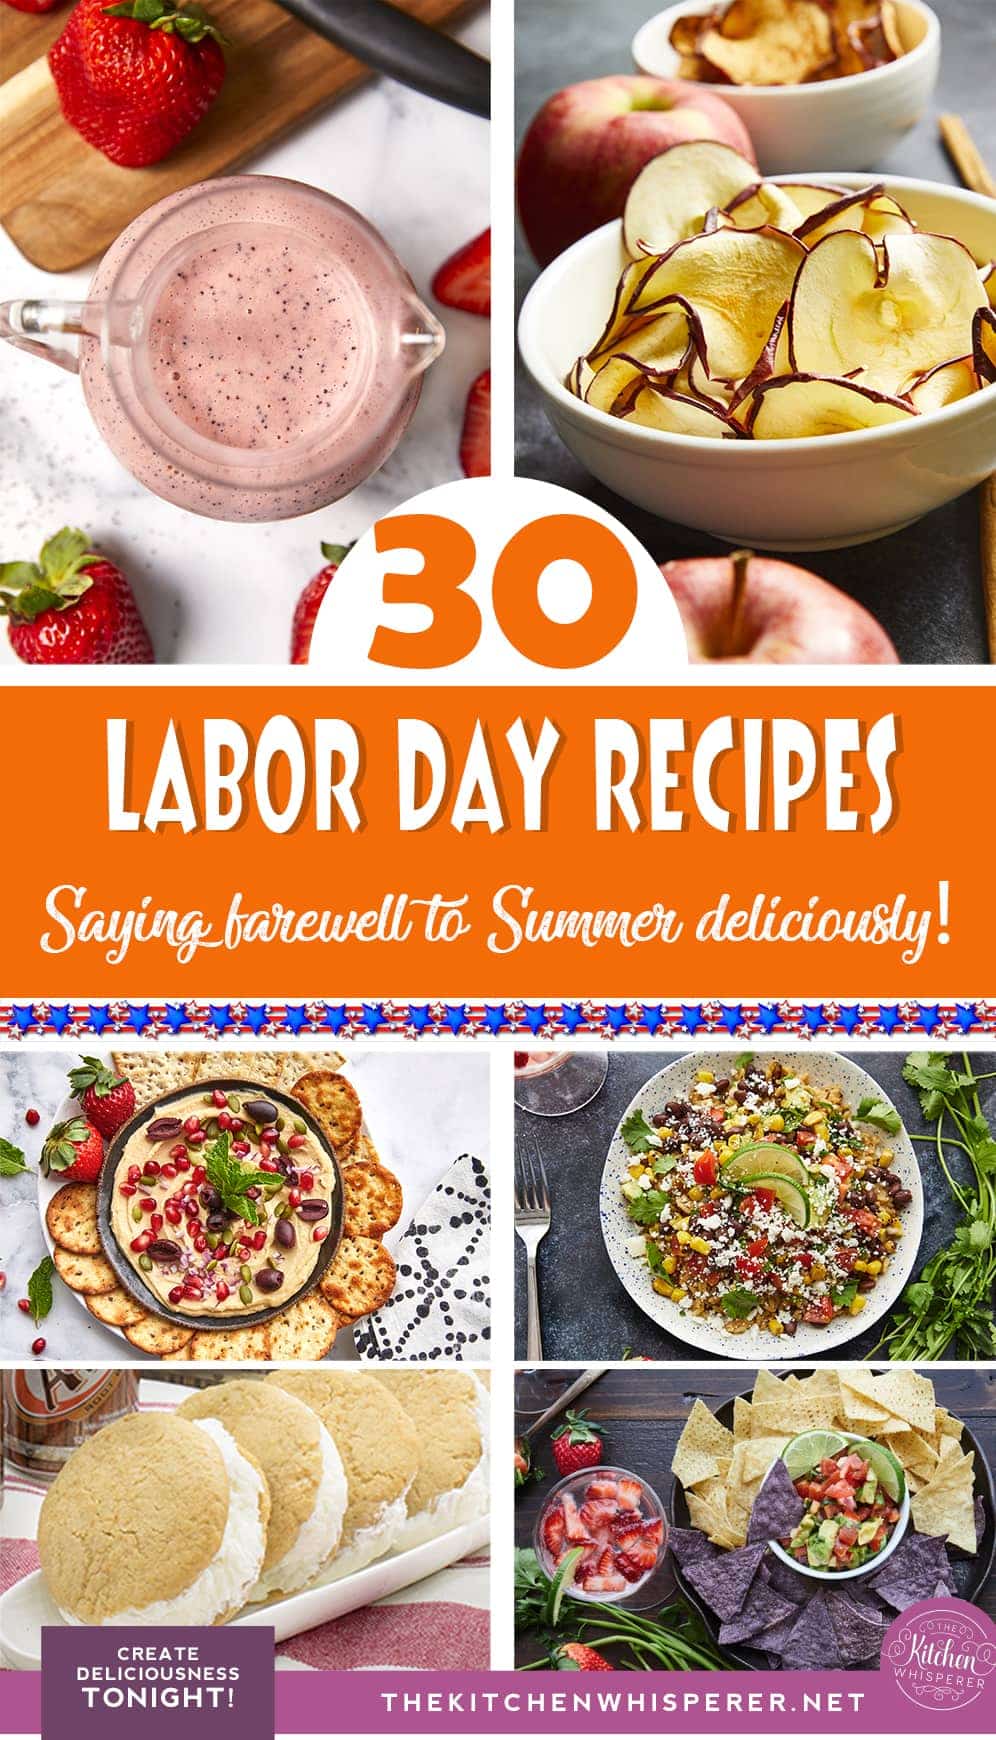 A collection of summer-inspired recipes with a hint of autumn eats to celebrate Labor day and say farewell to summer deliciously. Getting in those last bits of summertime bites while welcoming all of those warm autumn comfort foods Let’s Eat!